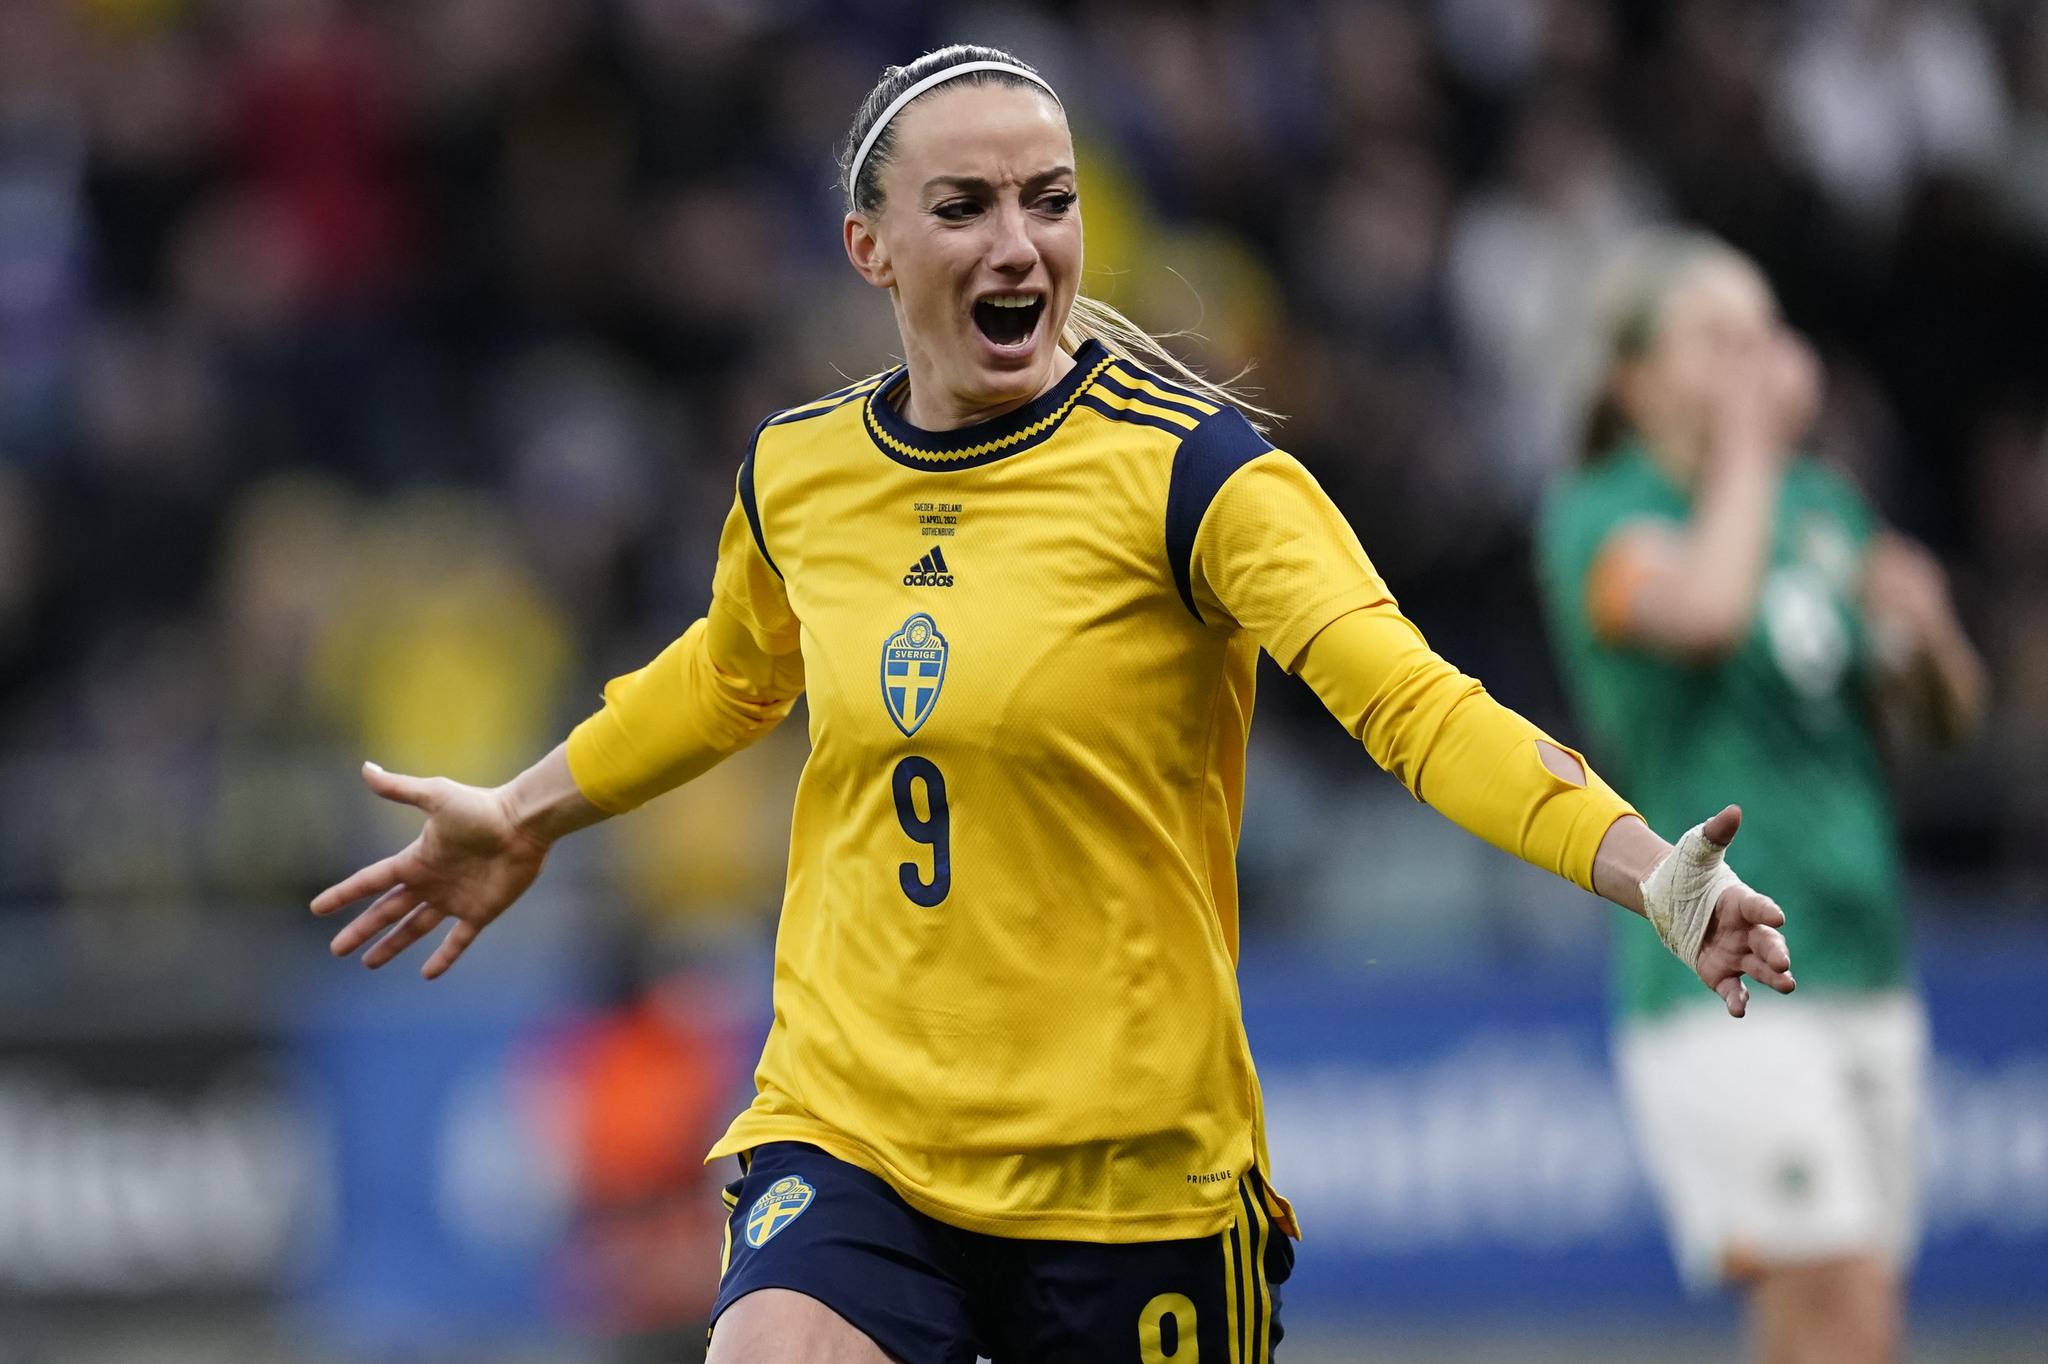 Footballer Kosovare Asllani dressed in Sweden's national team colours jubilant after scoring, running with her arms stretched out.